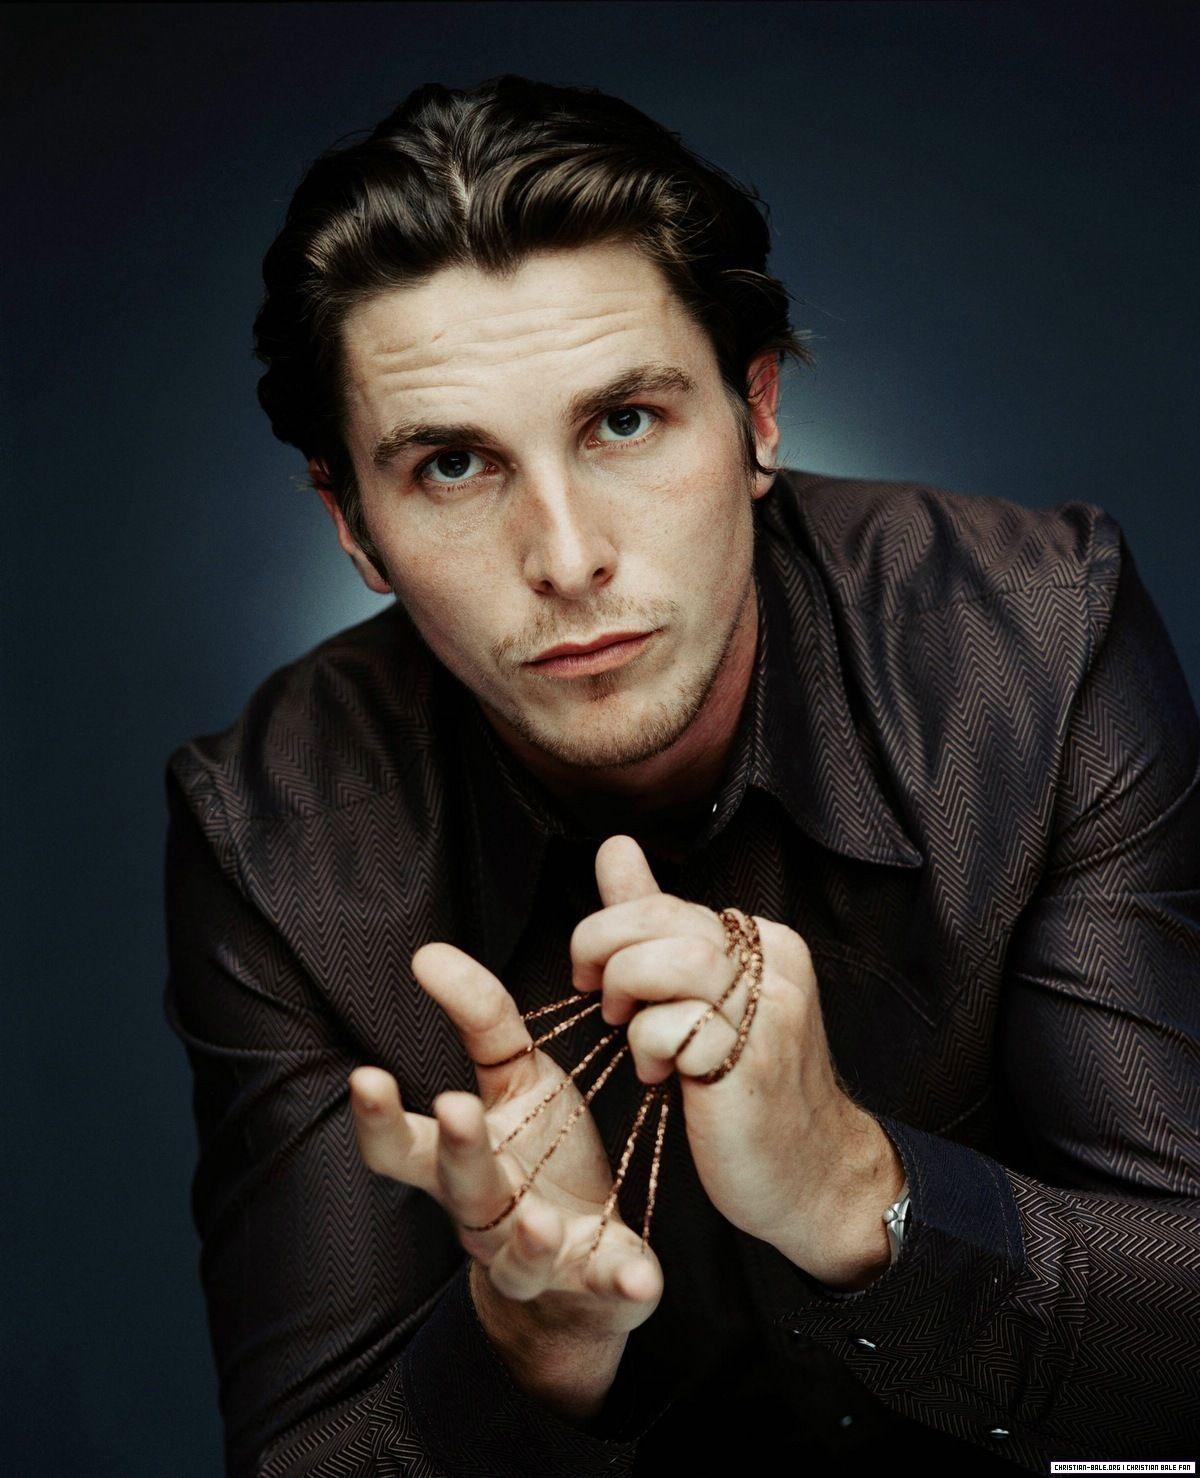 Christian Bale image bale HD wallpaper and background photo